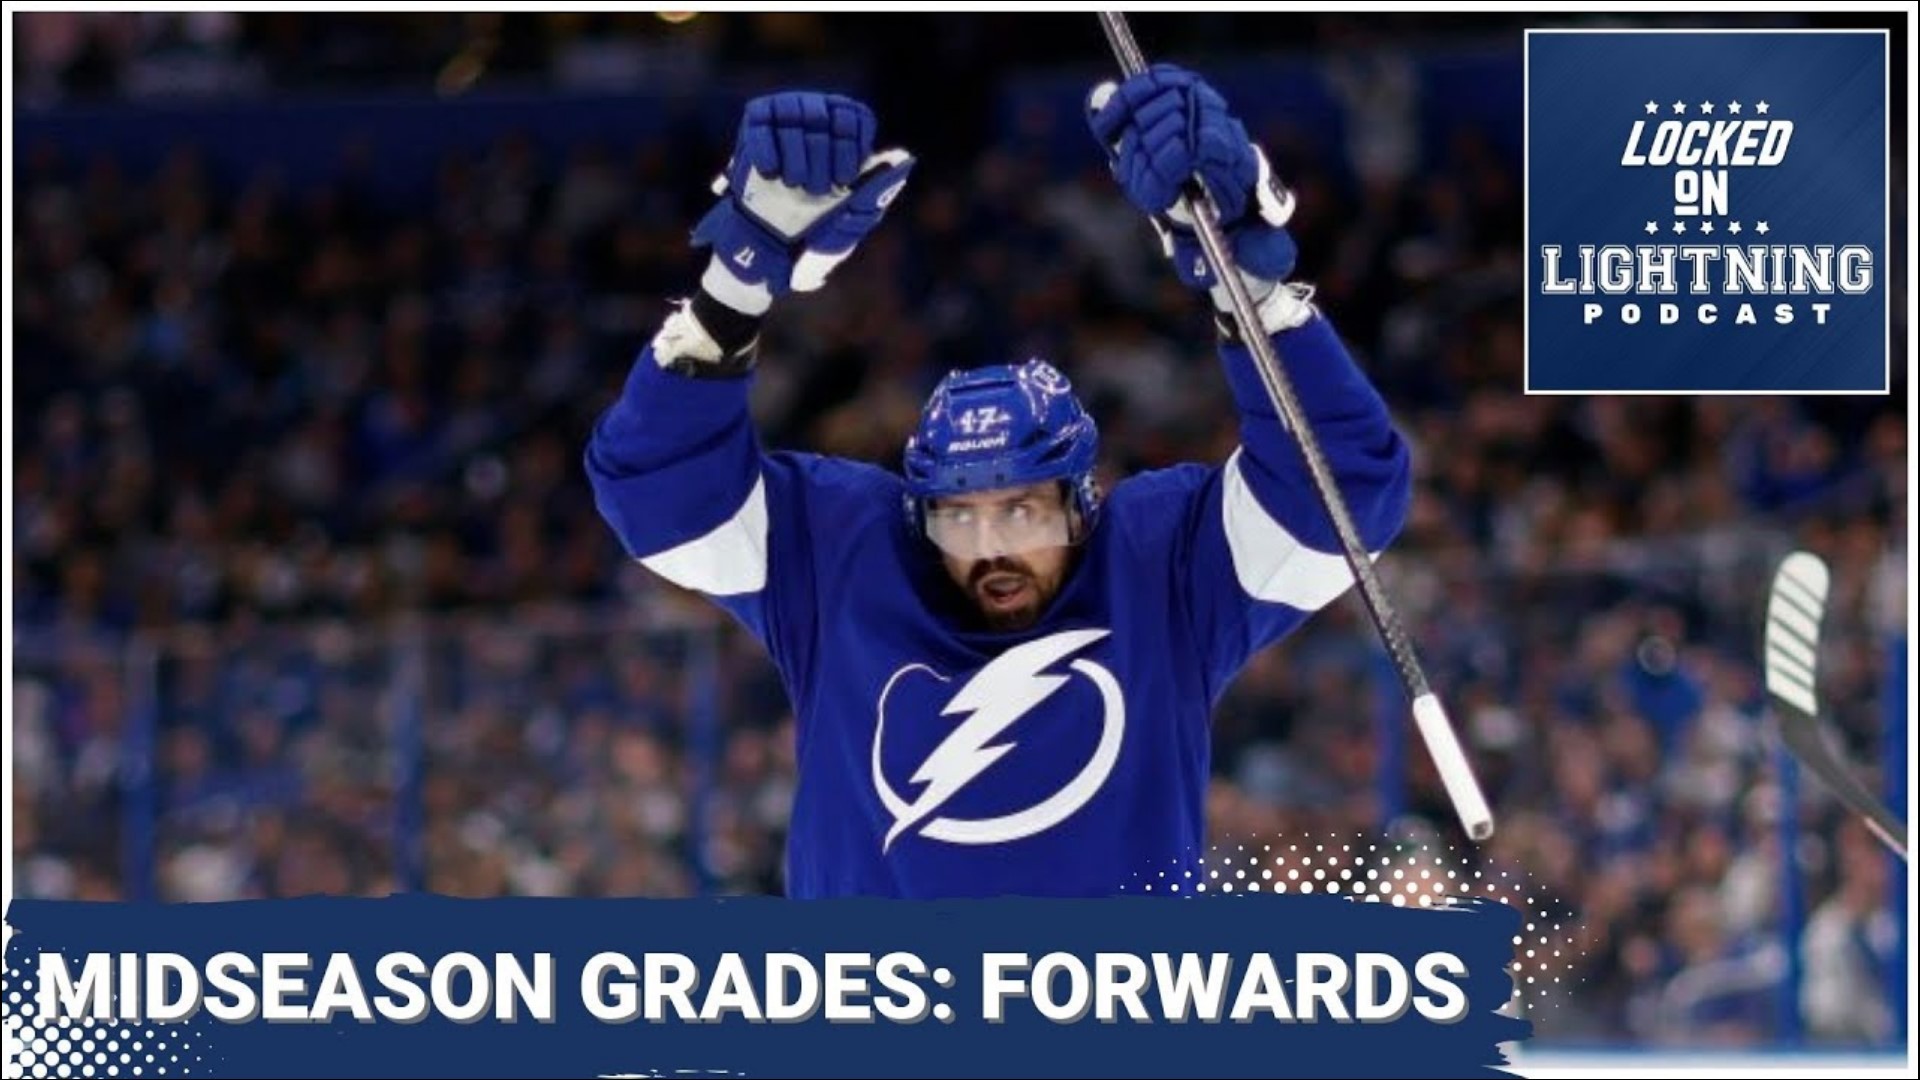 On today's episode, we evaluate all of the Lightning's forwards and hand out our midseason grades.